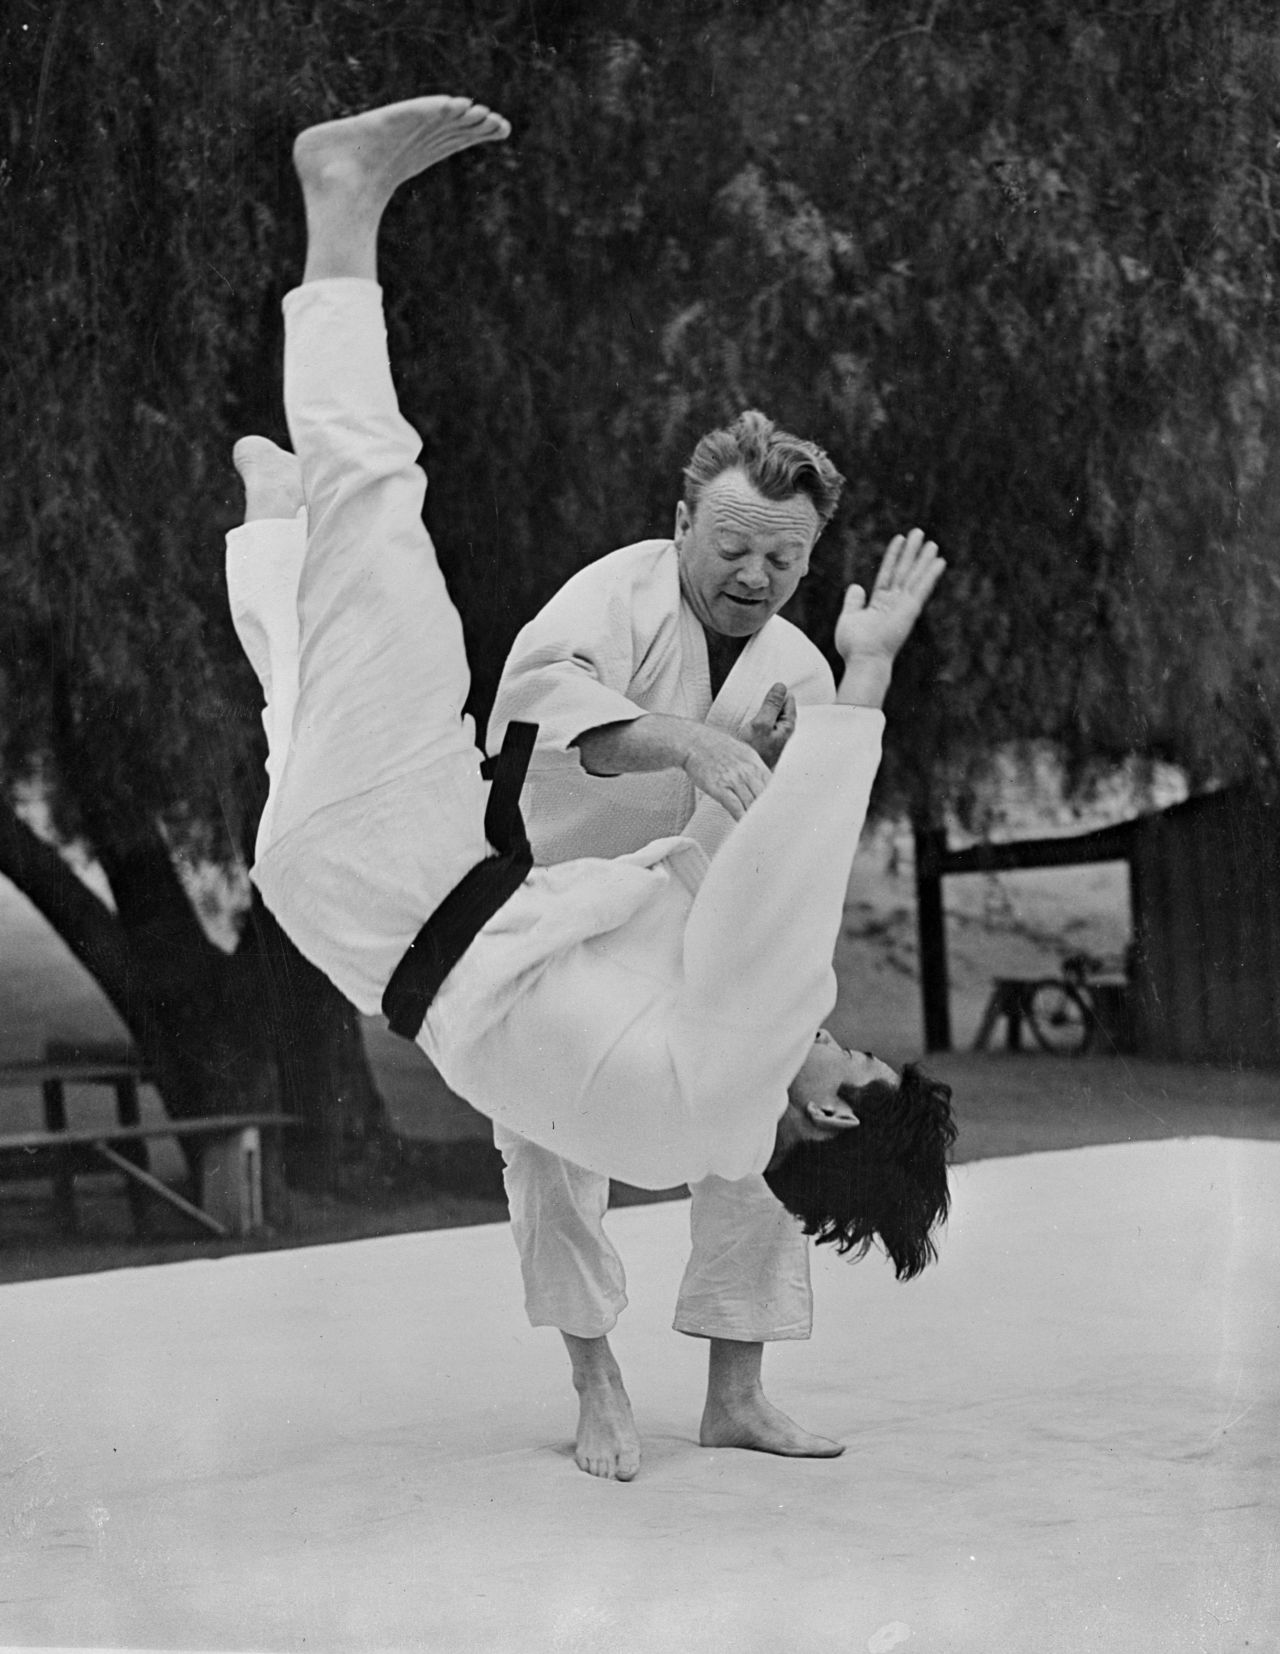 The American actor James Cagney was a judo black belt and performed some of his moves in the film Blood on the Sun.